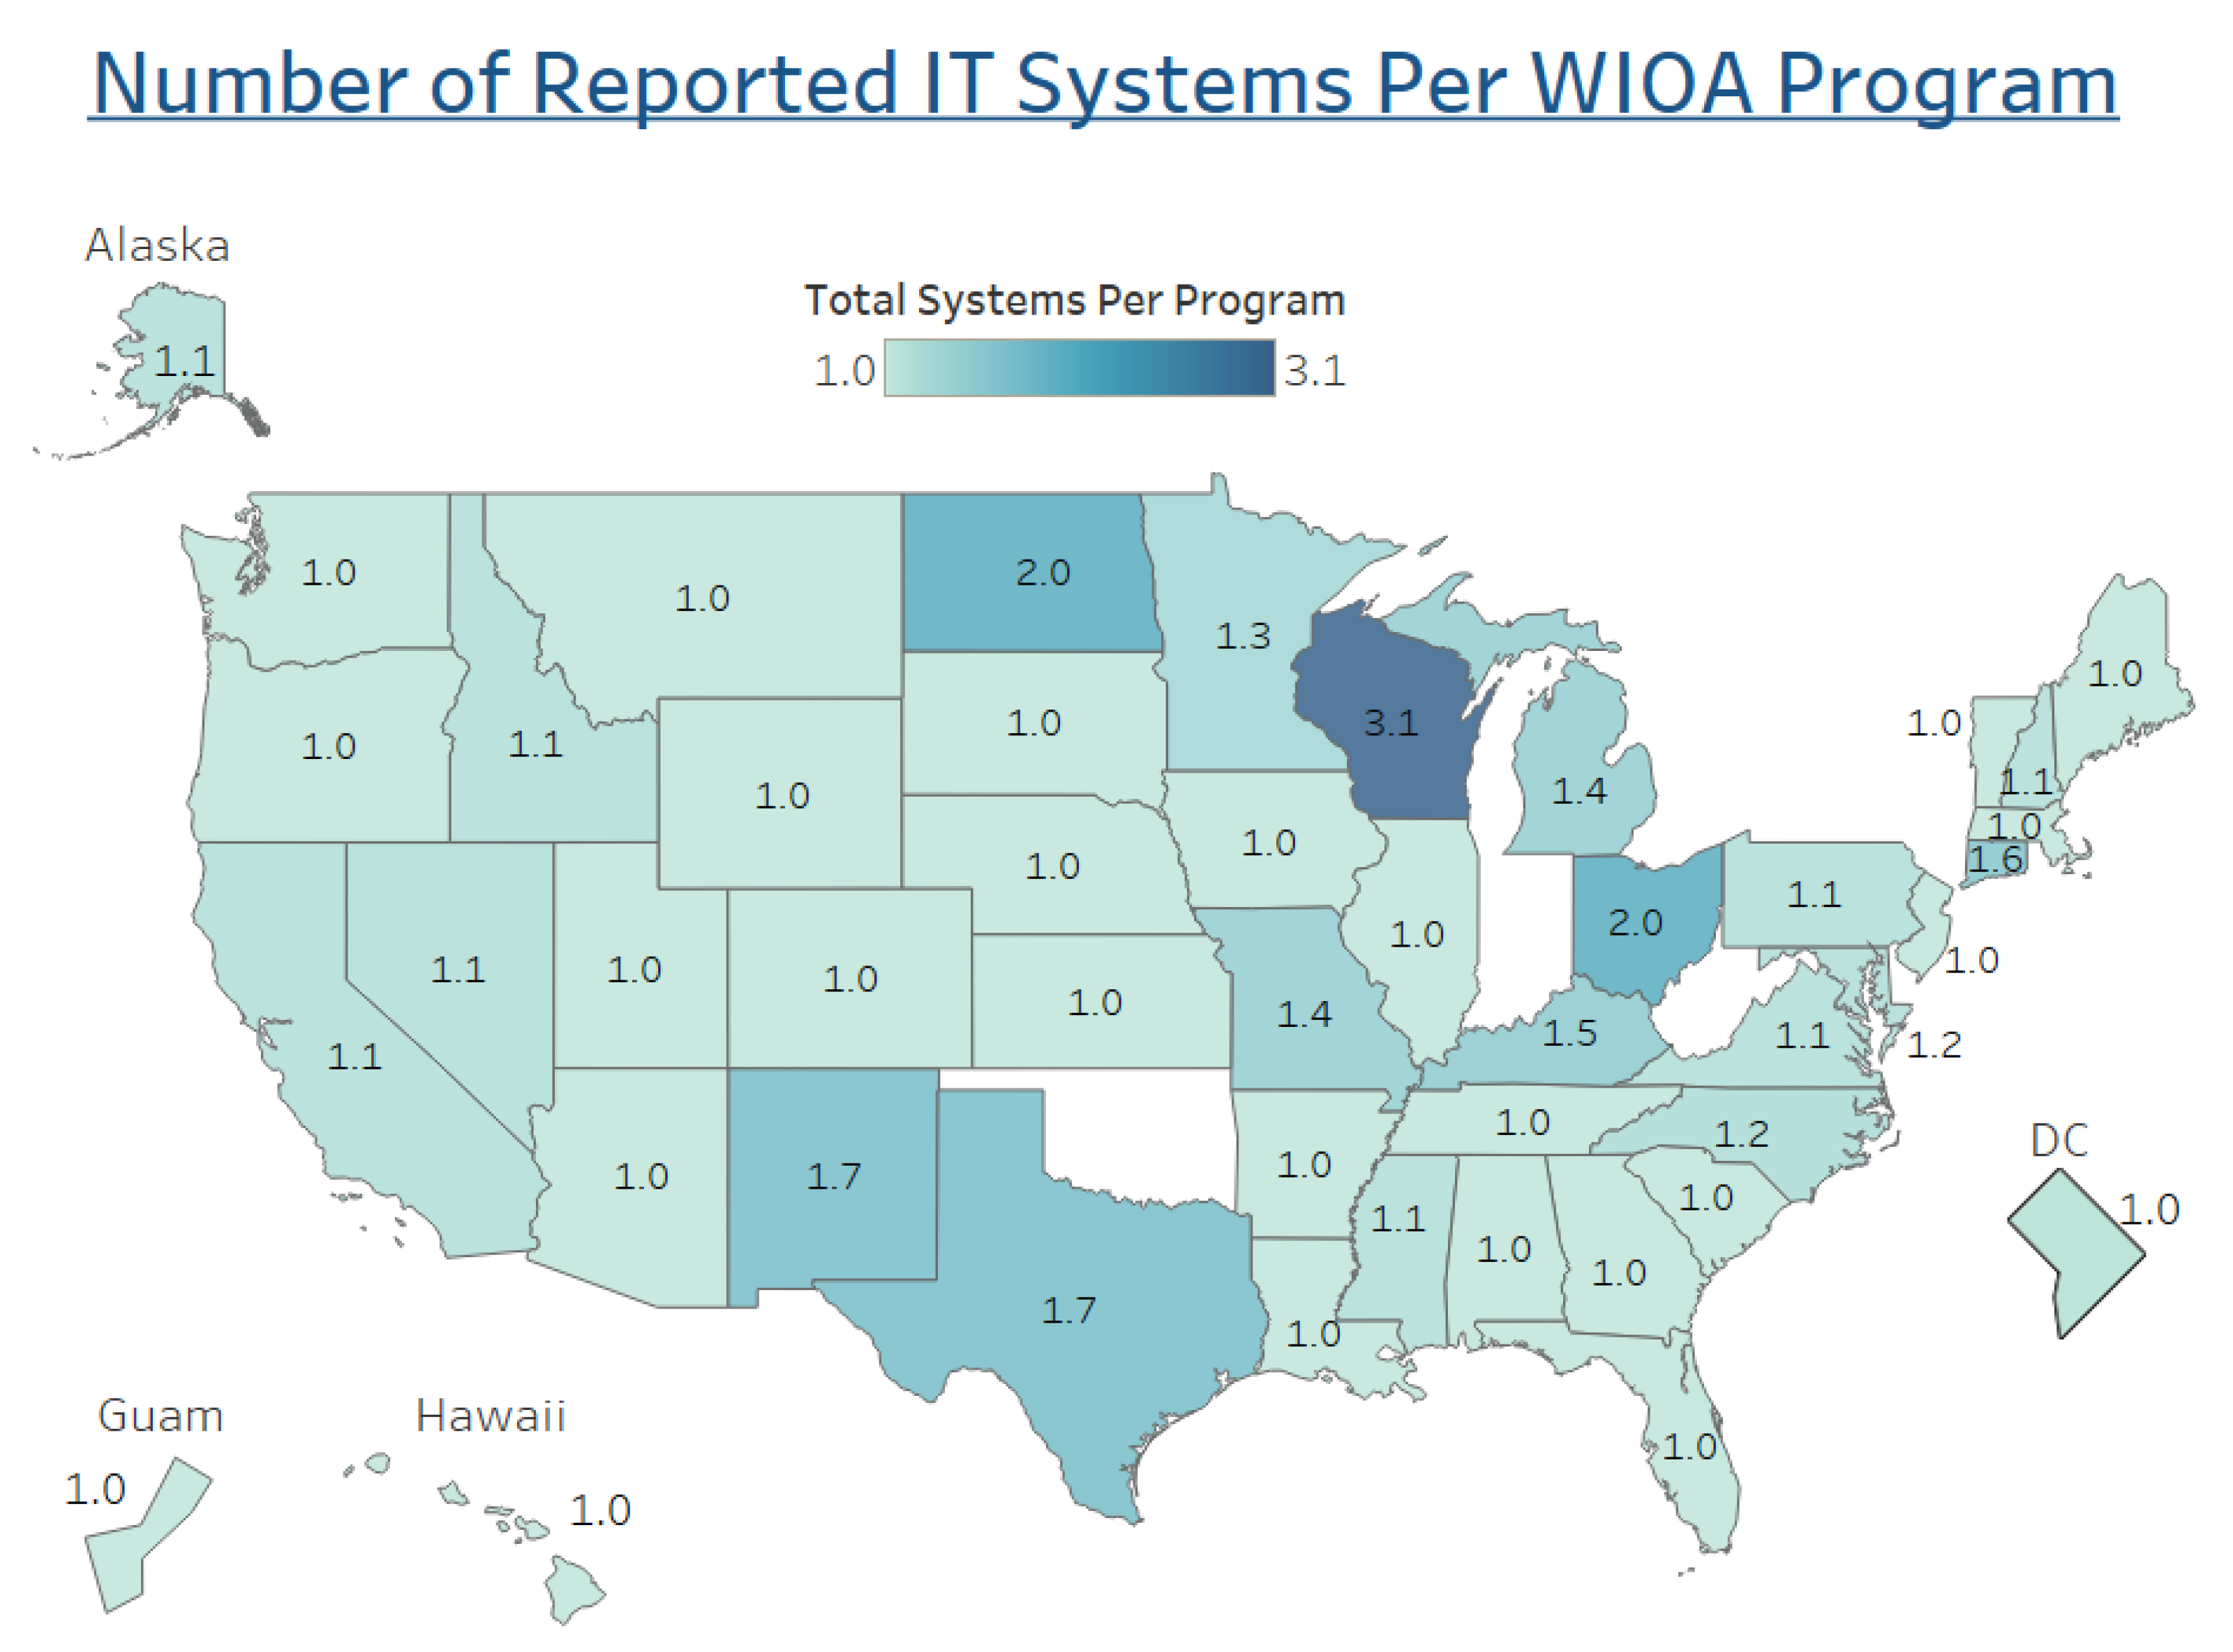 Number of Reported IT Systems Per WIOA Program